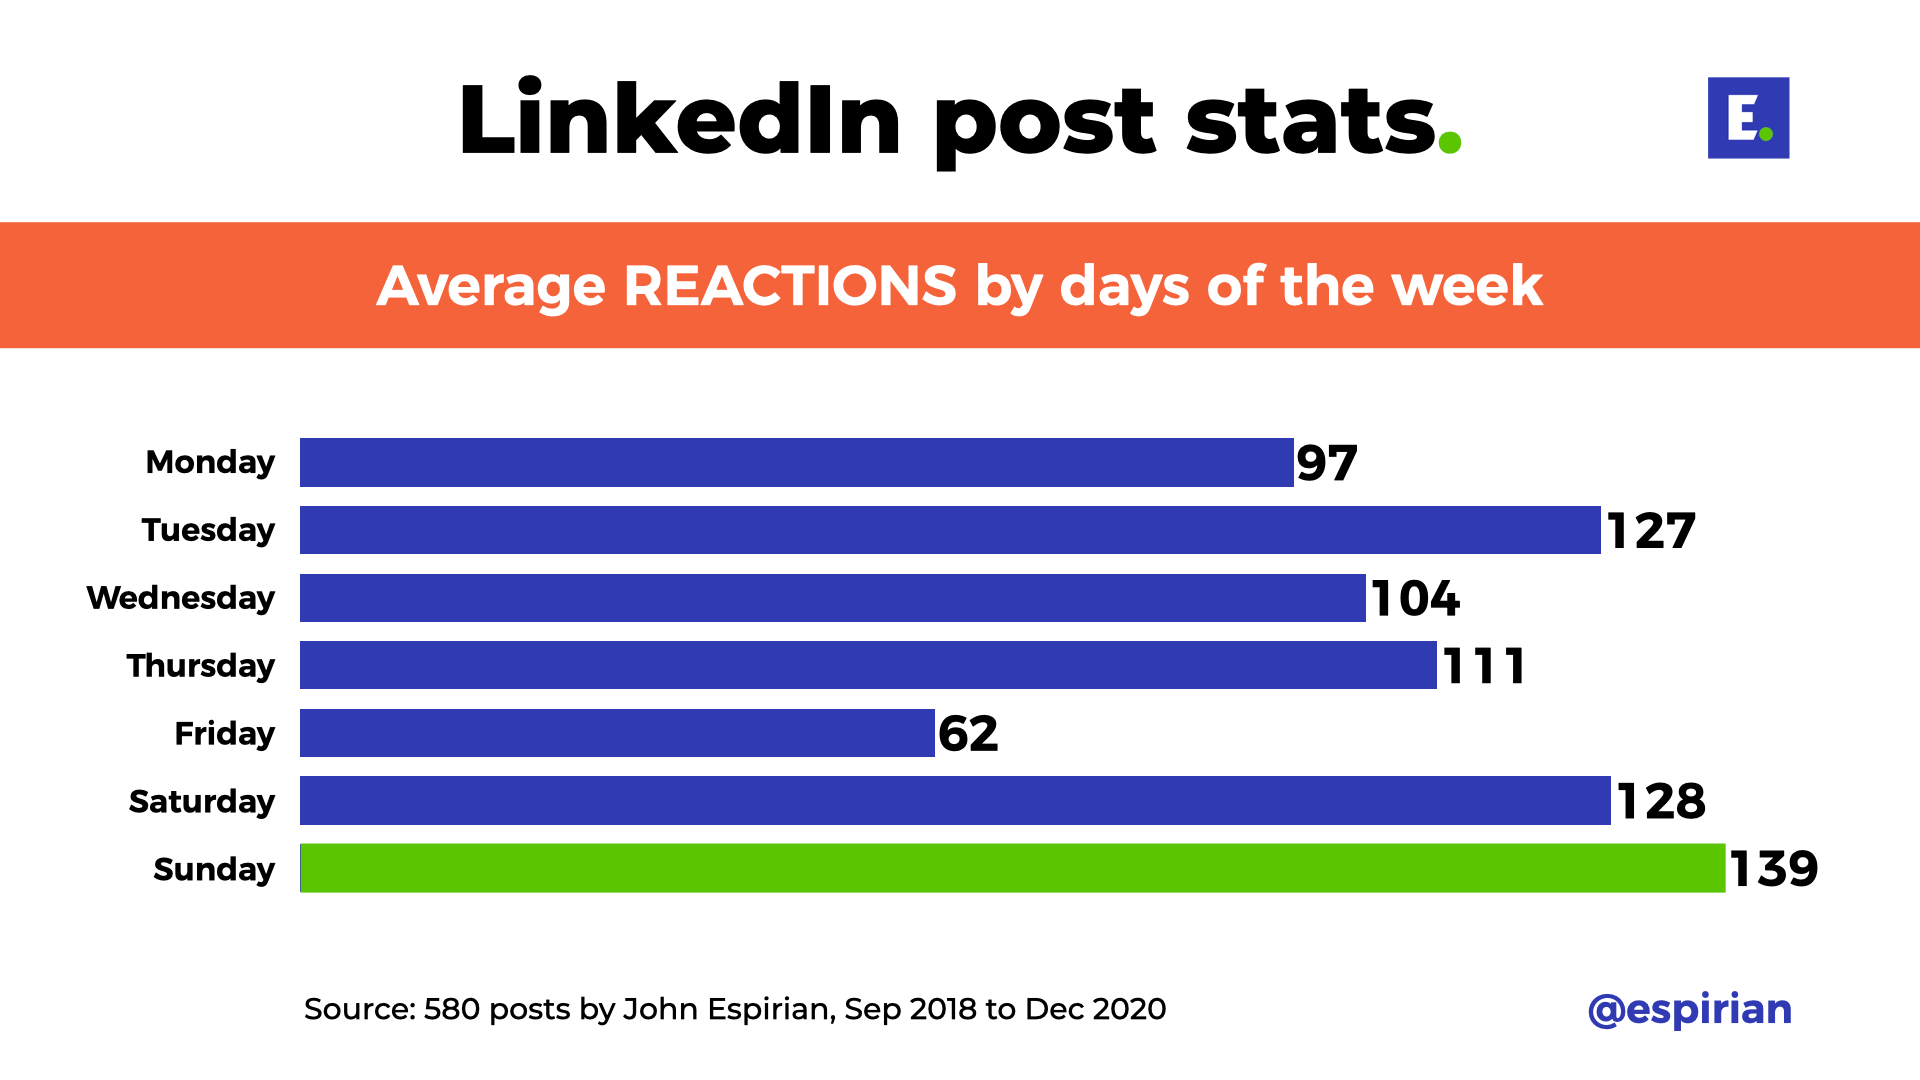 Average post reactions by days of the week